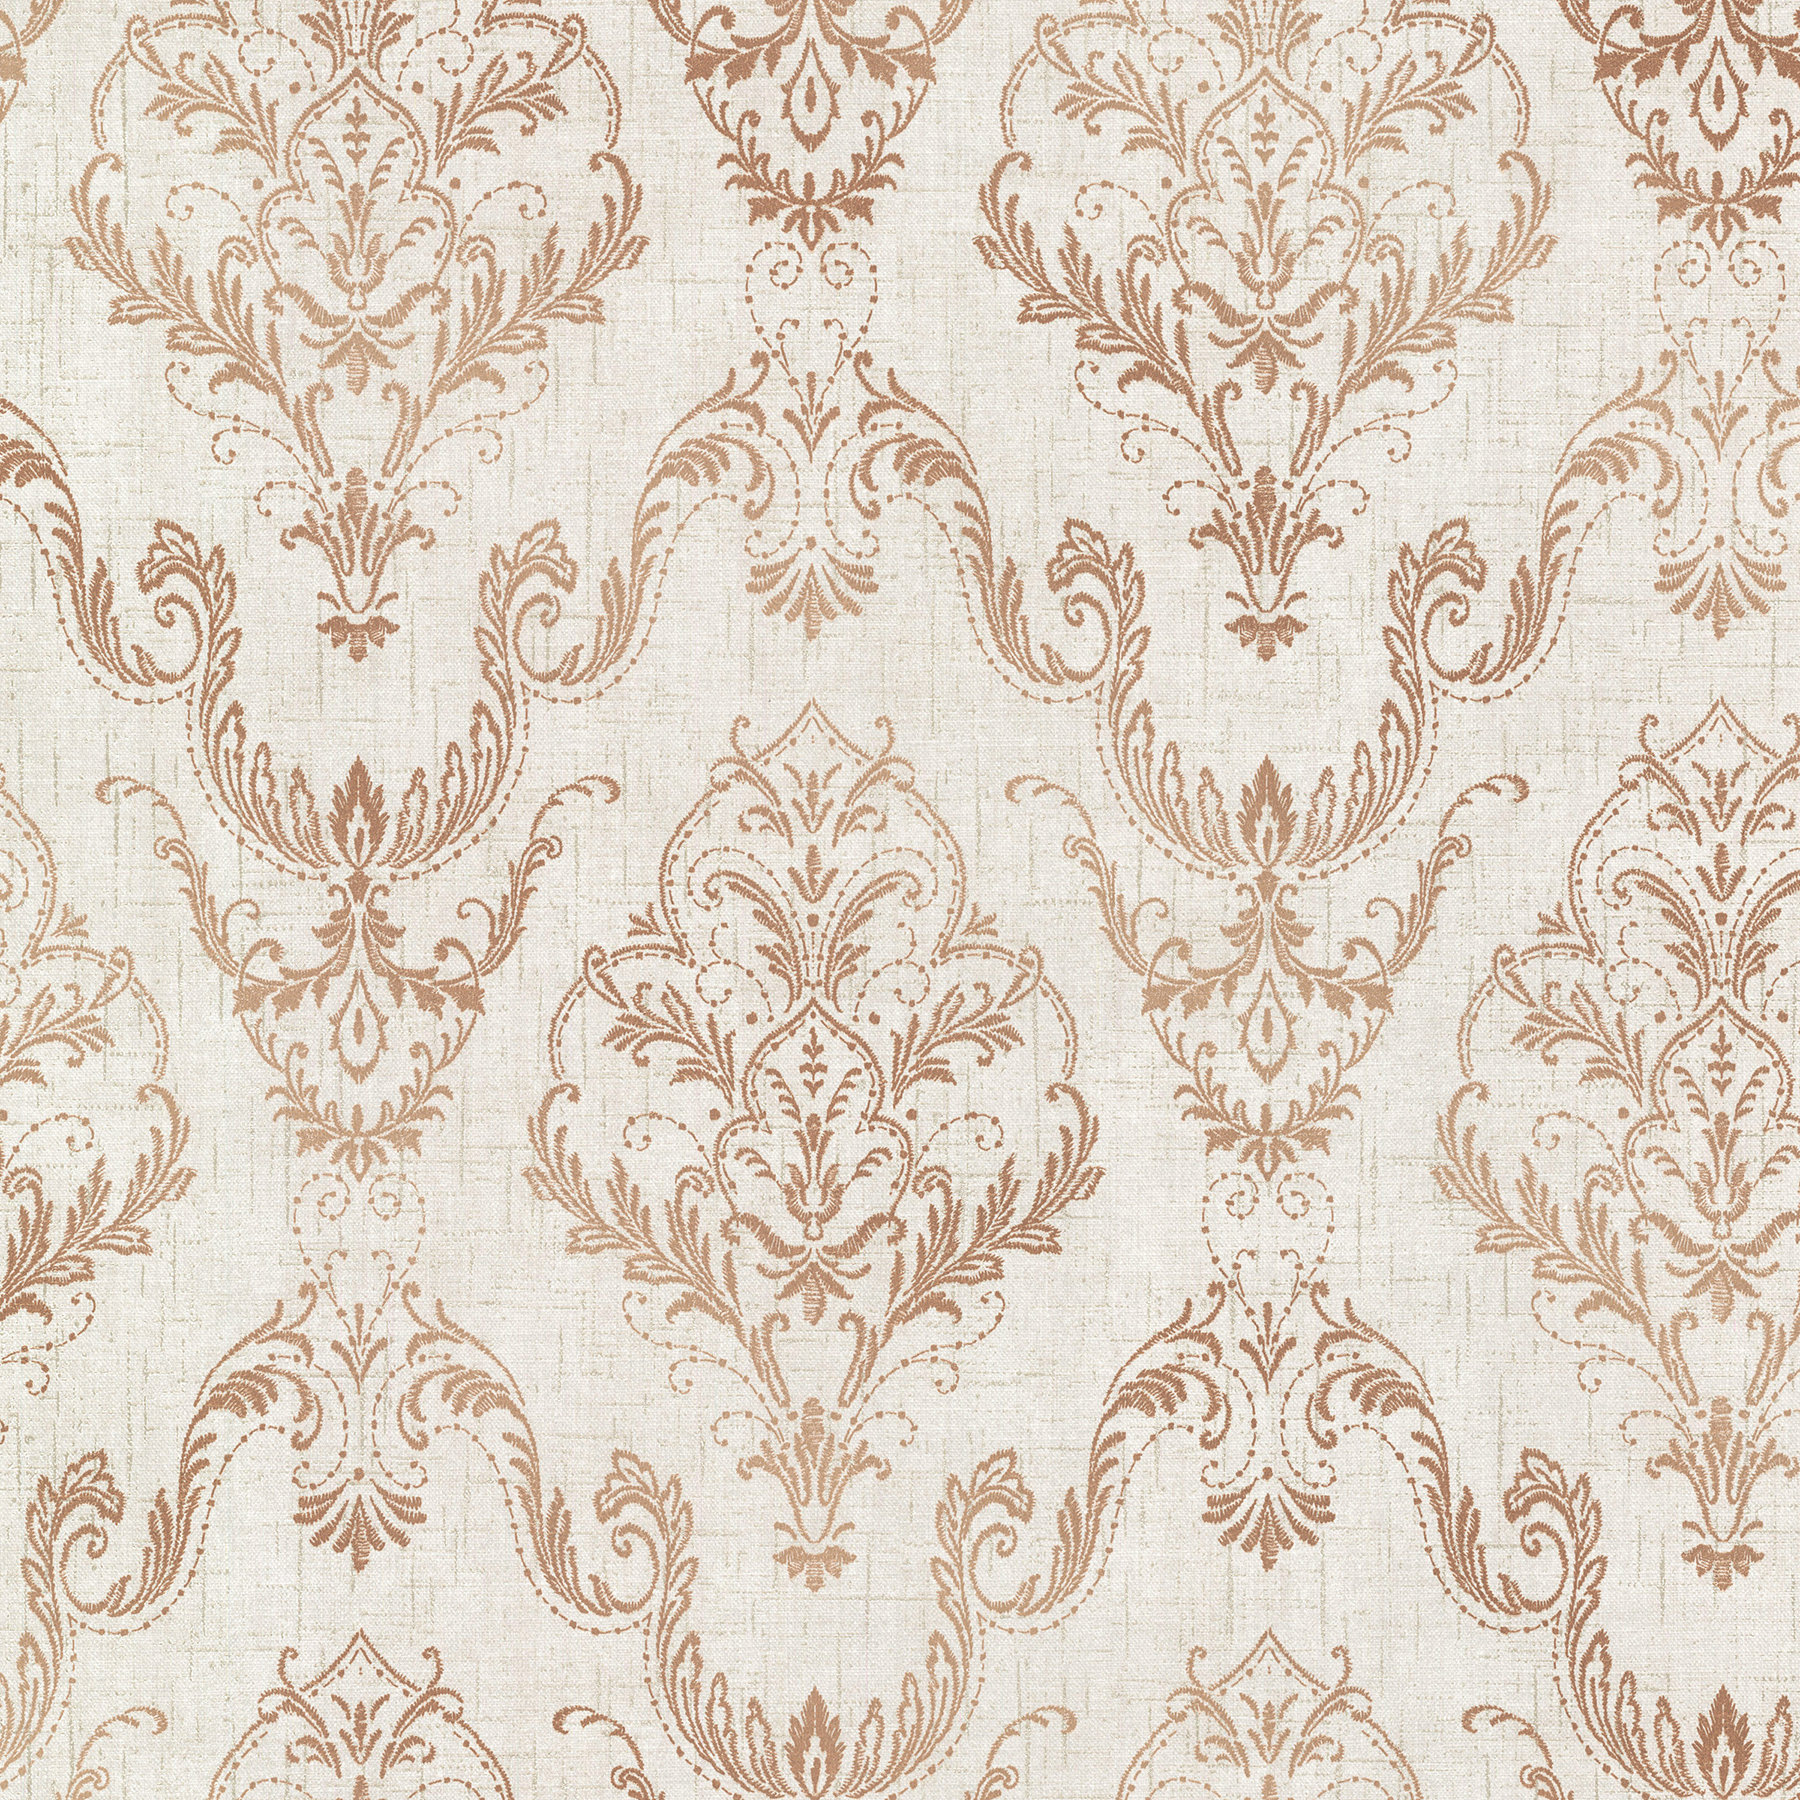 Wiley Copper Lace Damask Wallpaper